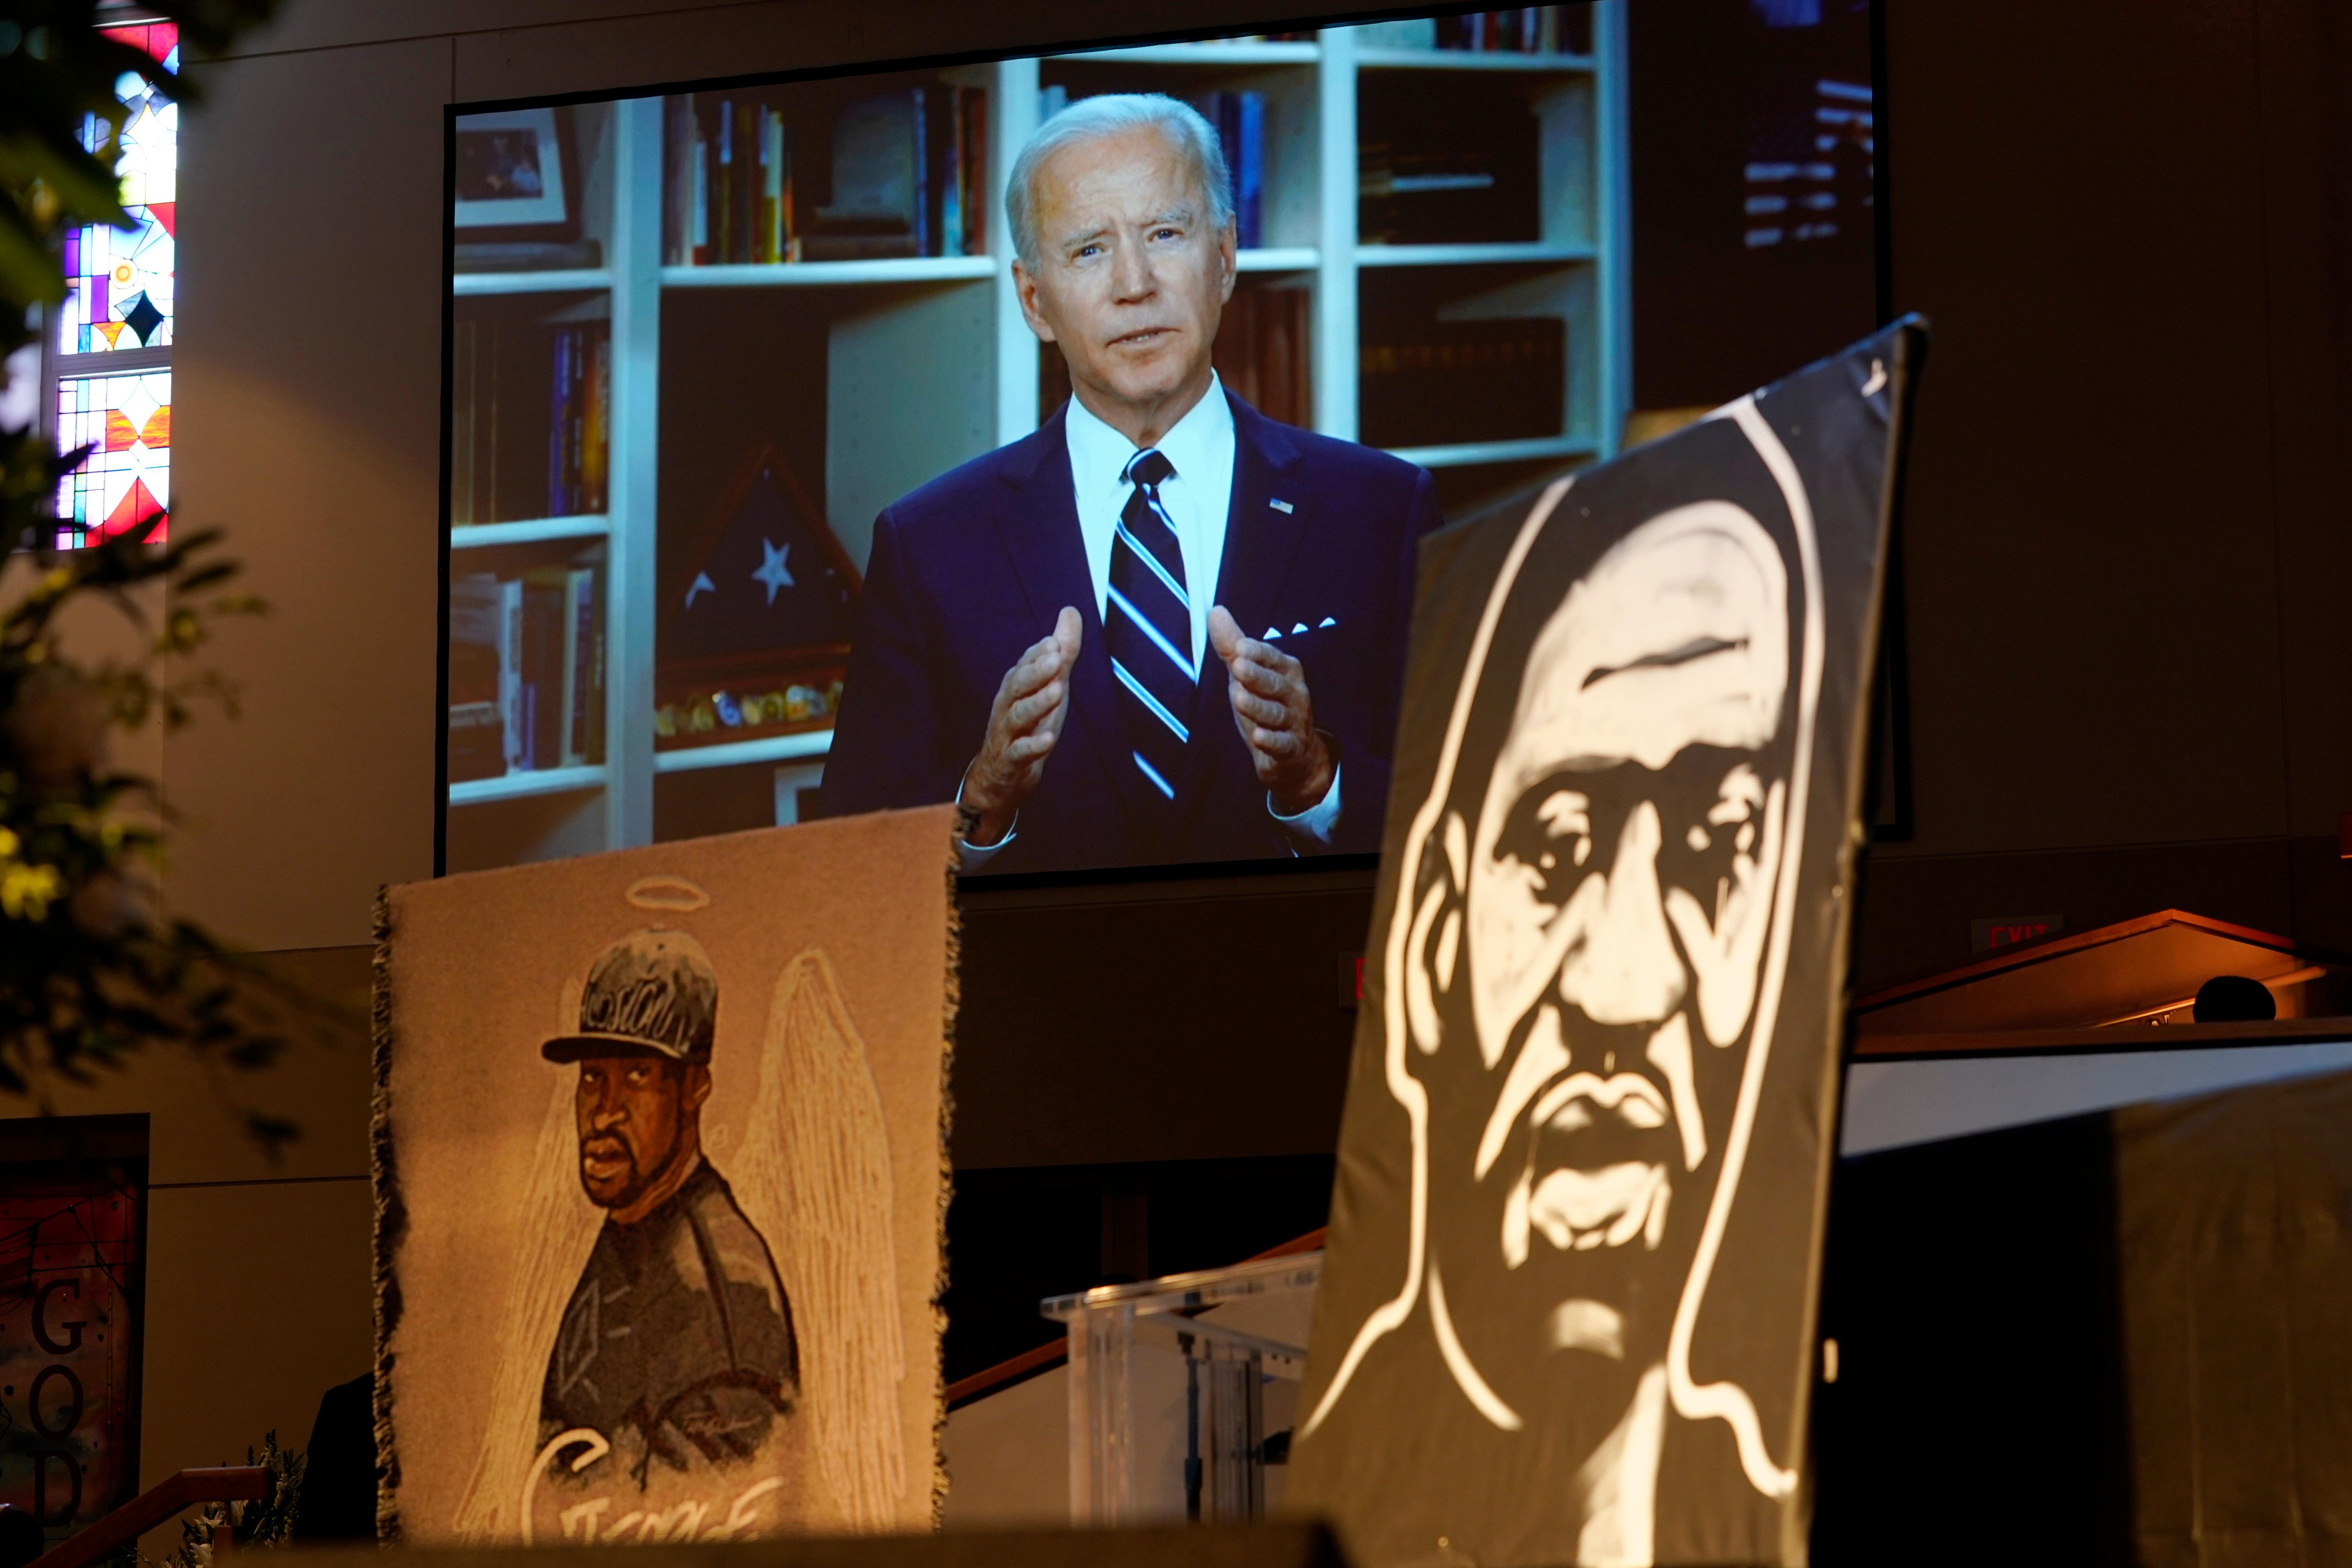 Democratic presidential candidate, former Vice President Joe Biden speaks via video link as family and guests attend the funeral service for George Floyd at The Fountain of Praise church Tuesday, June 9, 2020, in Houston. (AP Photo/David J. Phillip, Pool)